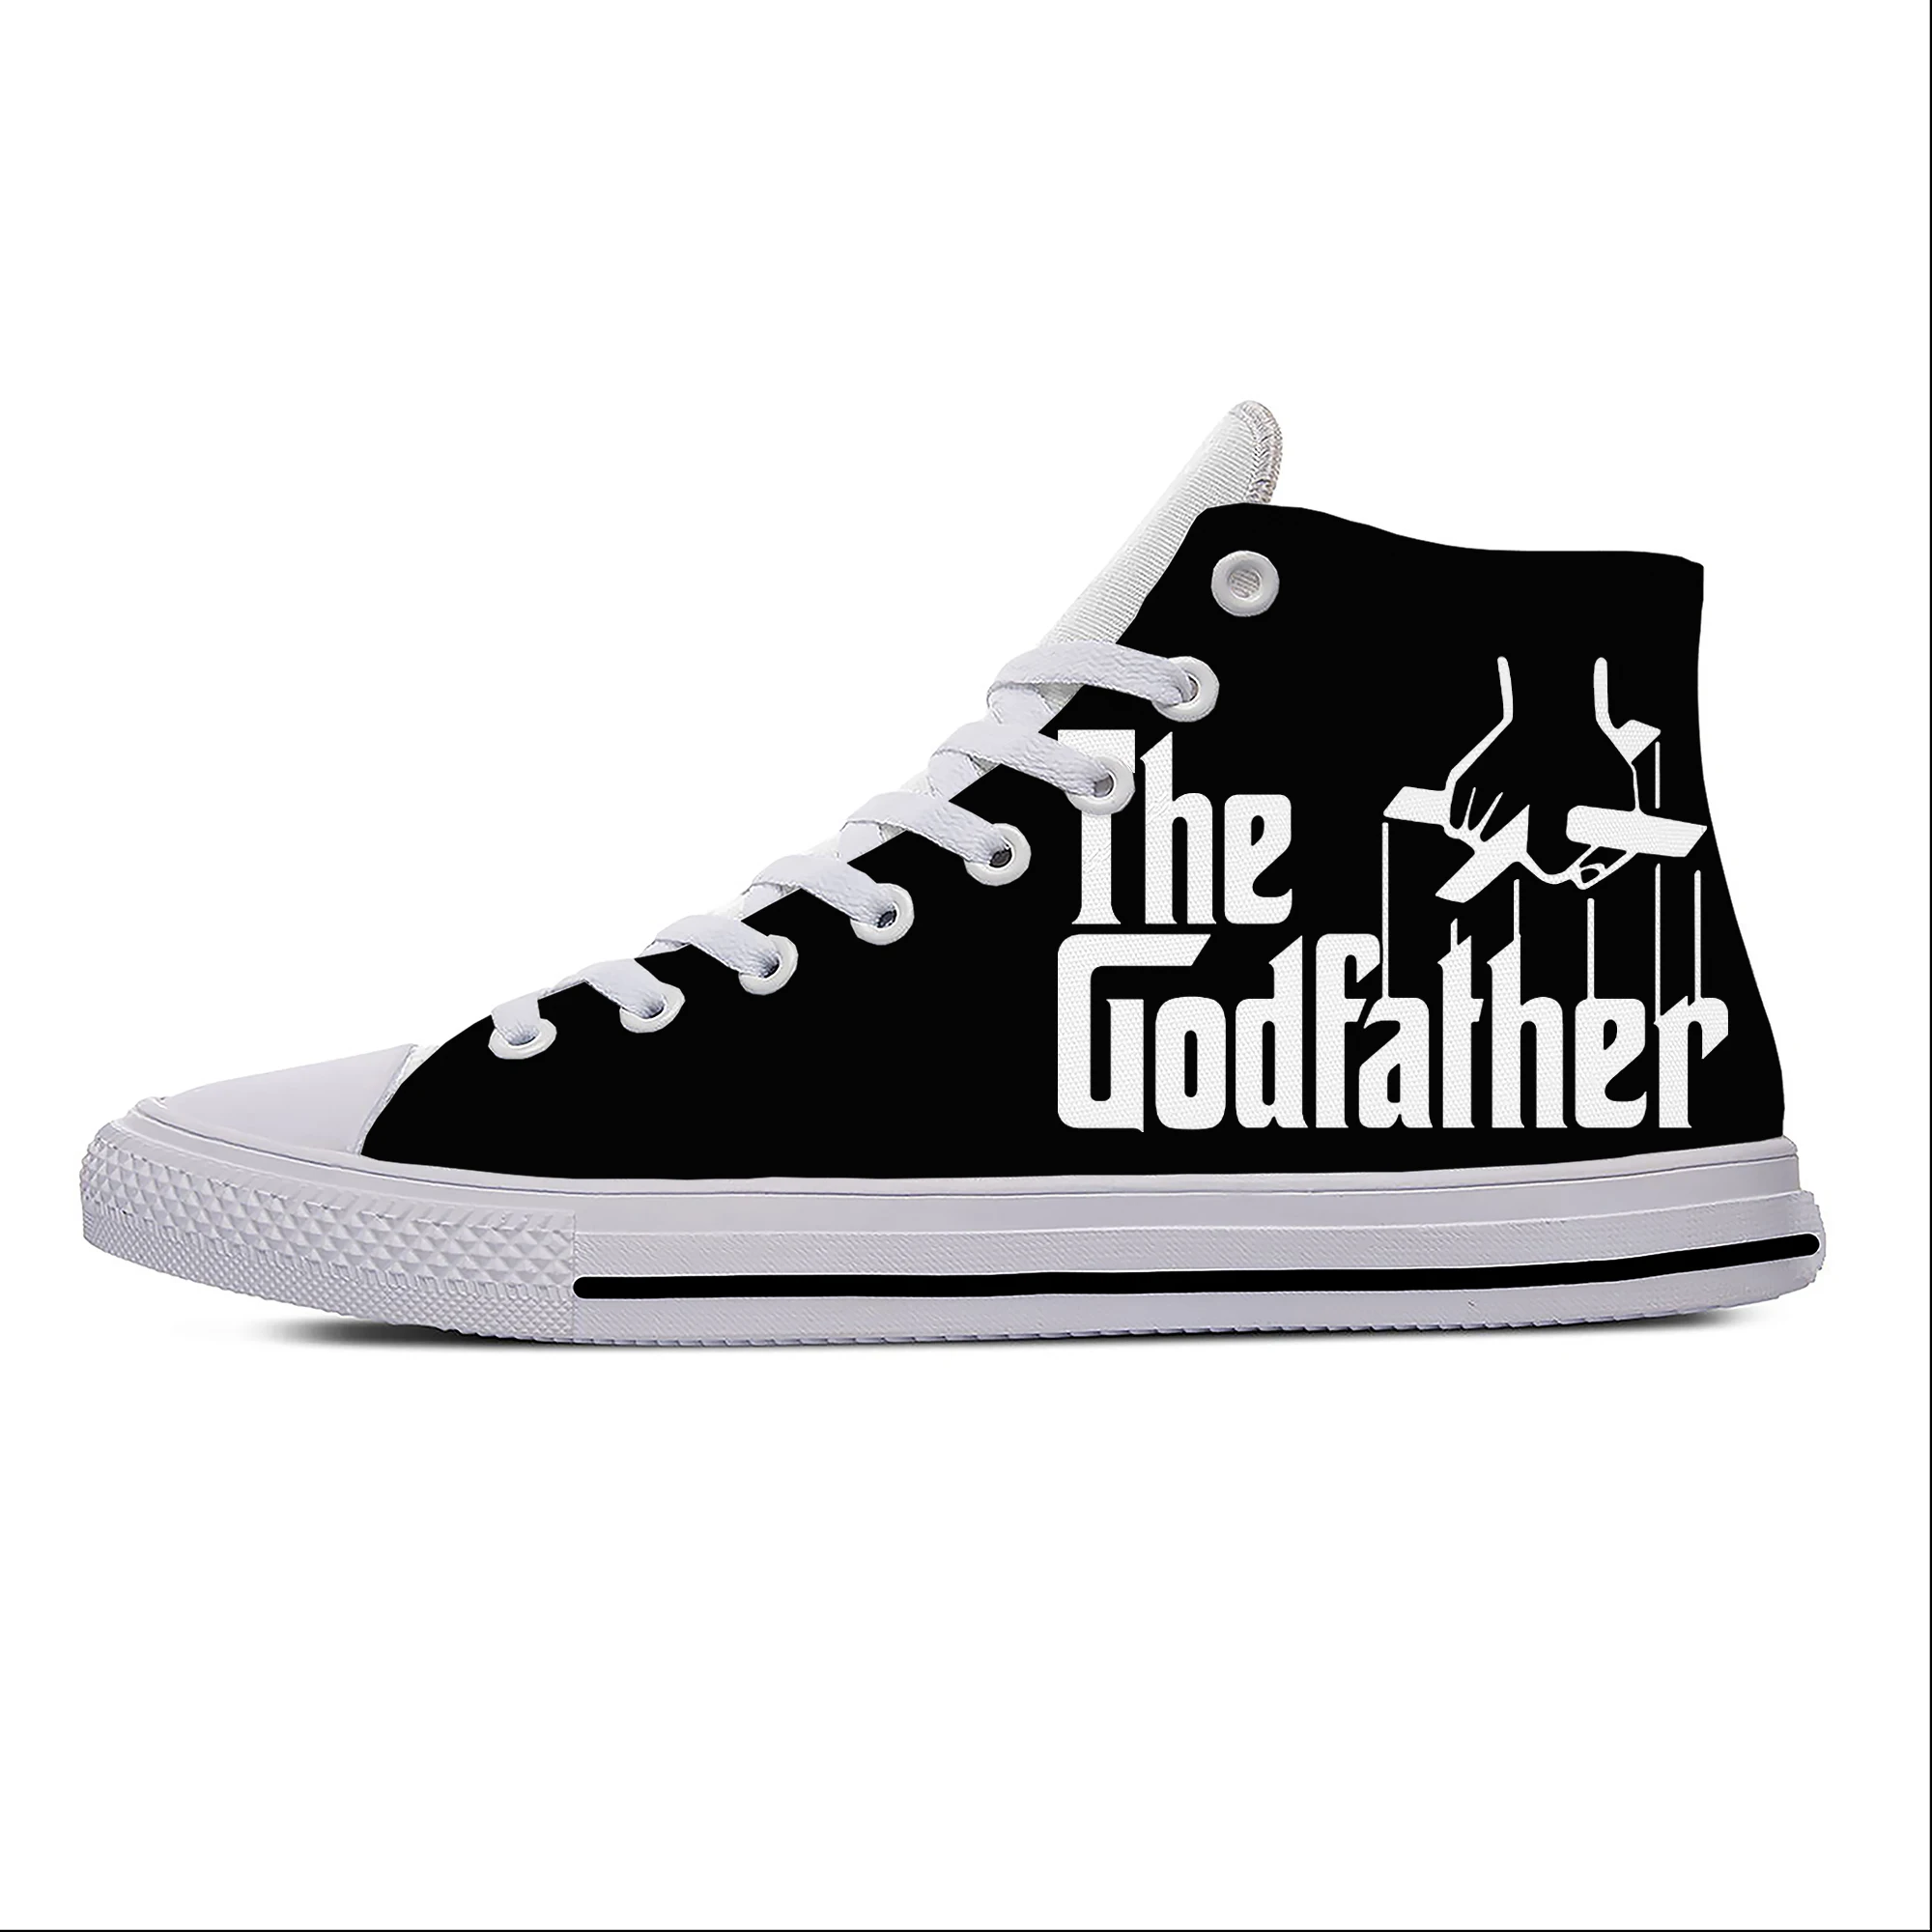 

Movie The Godfather High Top Sneakers Mens Womens Teenager Casual Shoes Canvas Running Shoes 3D Breathable Lightweight shoe